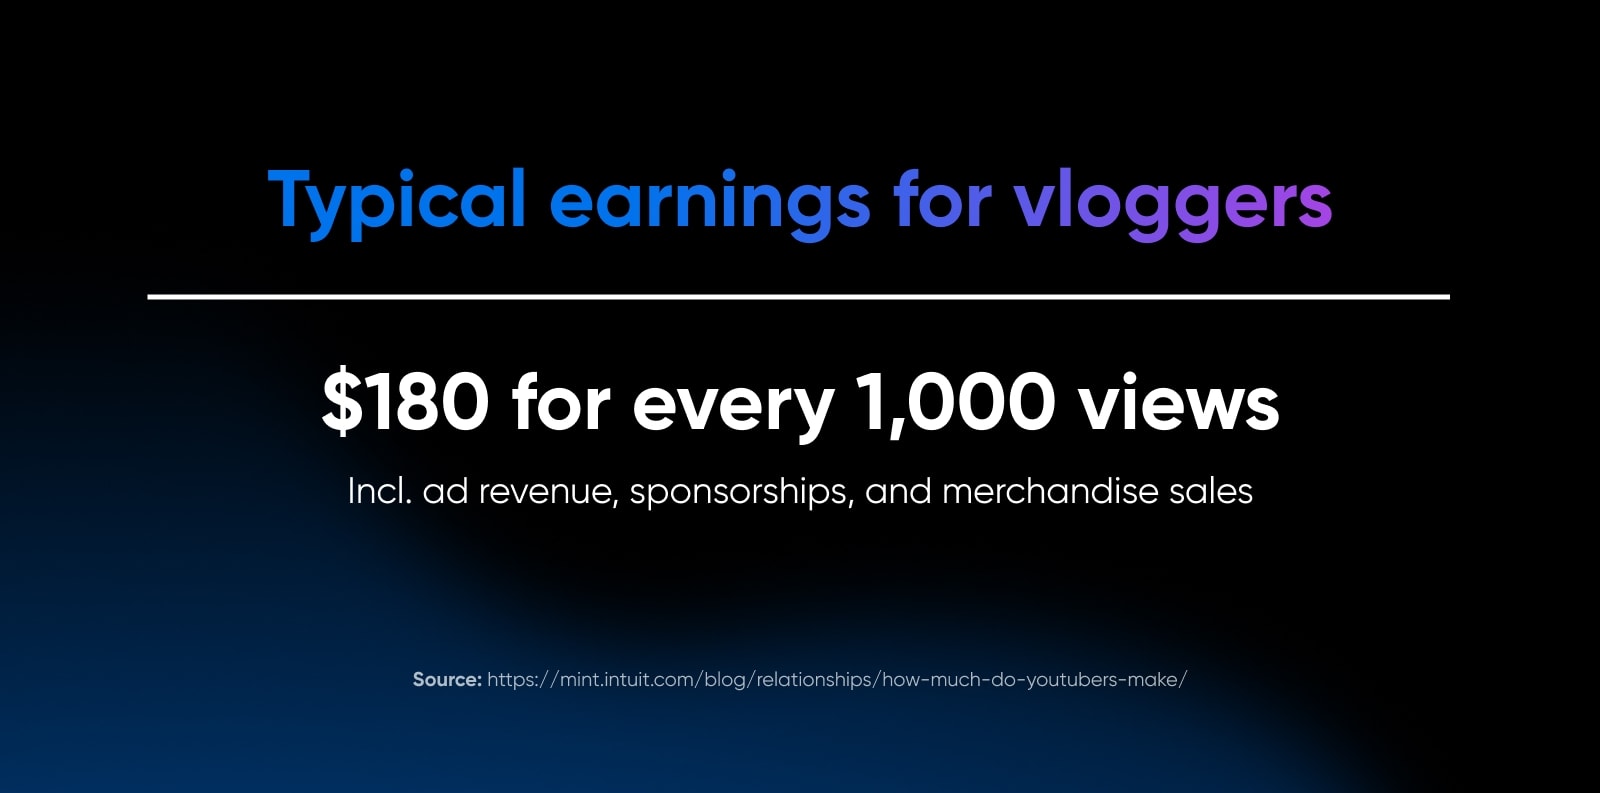 Typical earnings for vloggers